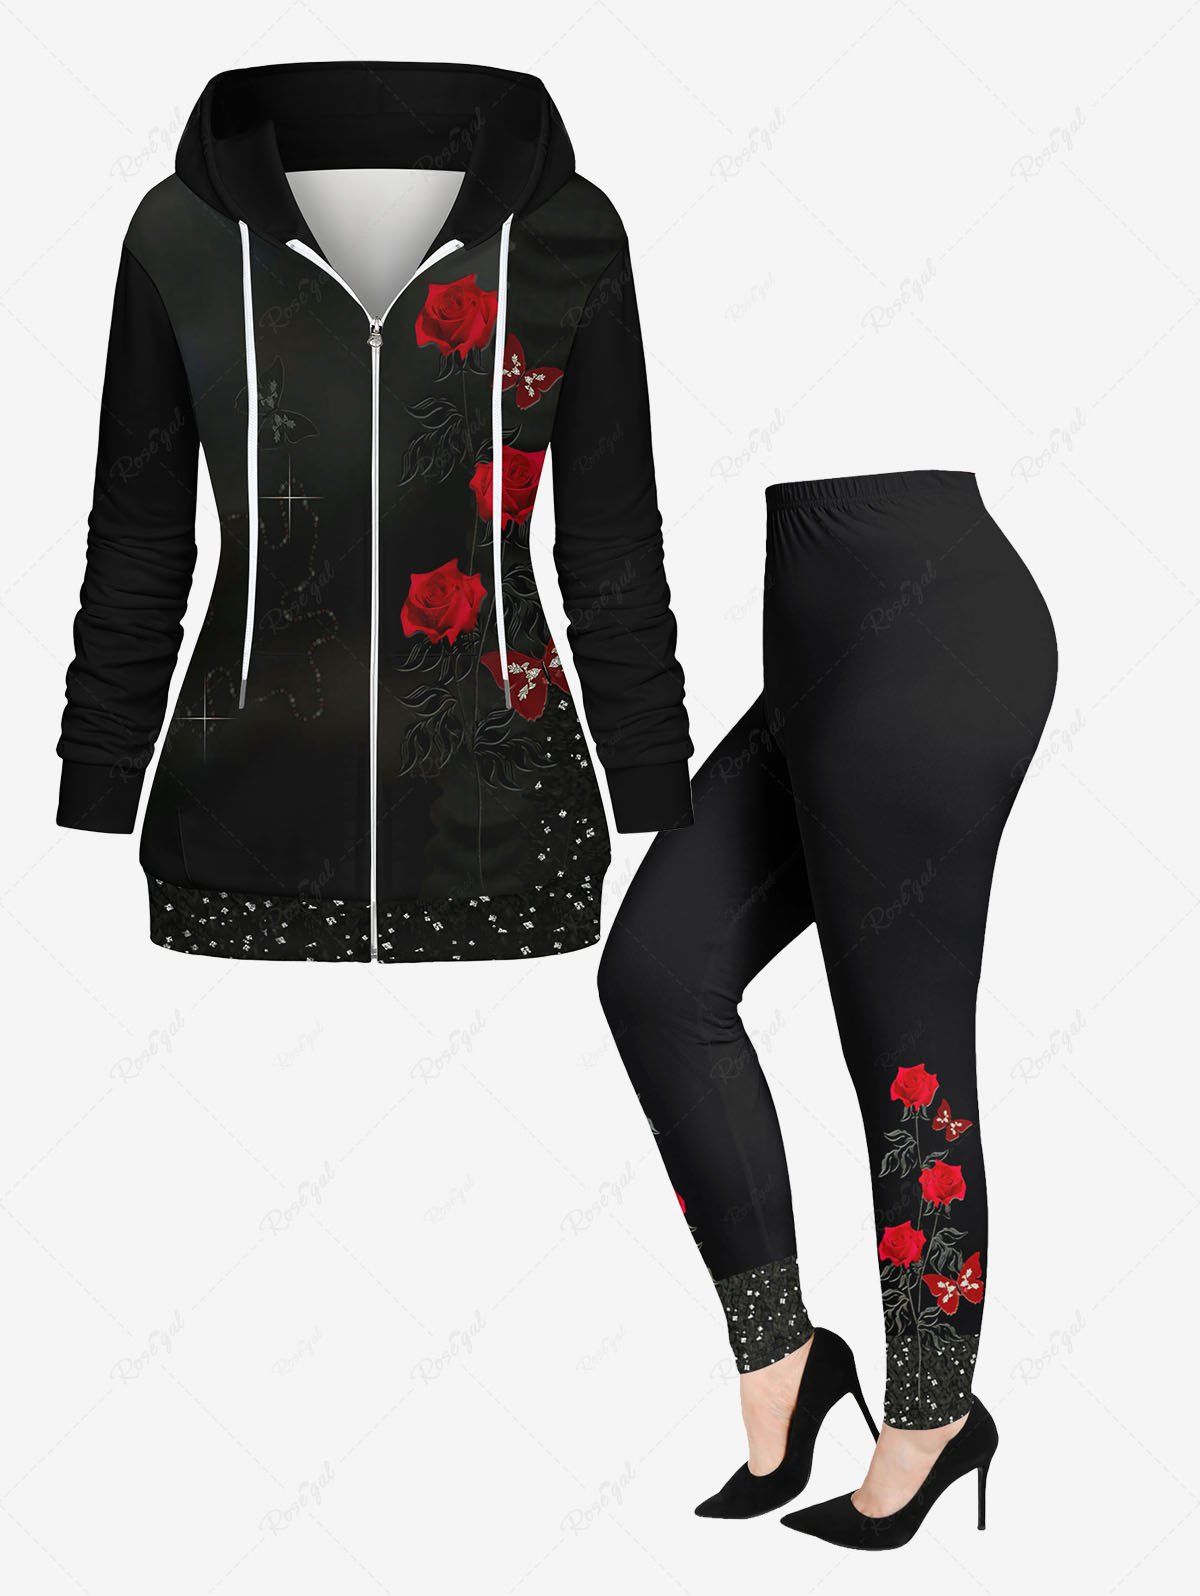 Best Valentine's Day Rose Flowers Butterfly Crystal Colorblock Glitter 3D Printed Pockets Zip Up Drawstring Hoodie and Leggings Plus Size Matching Set  